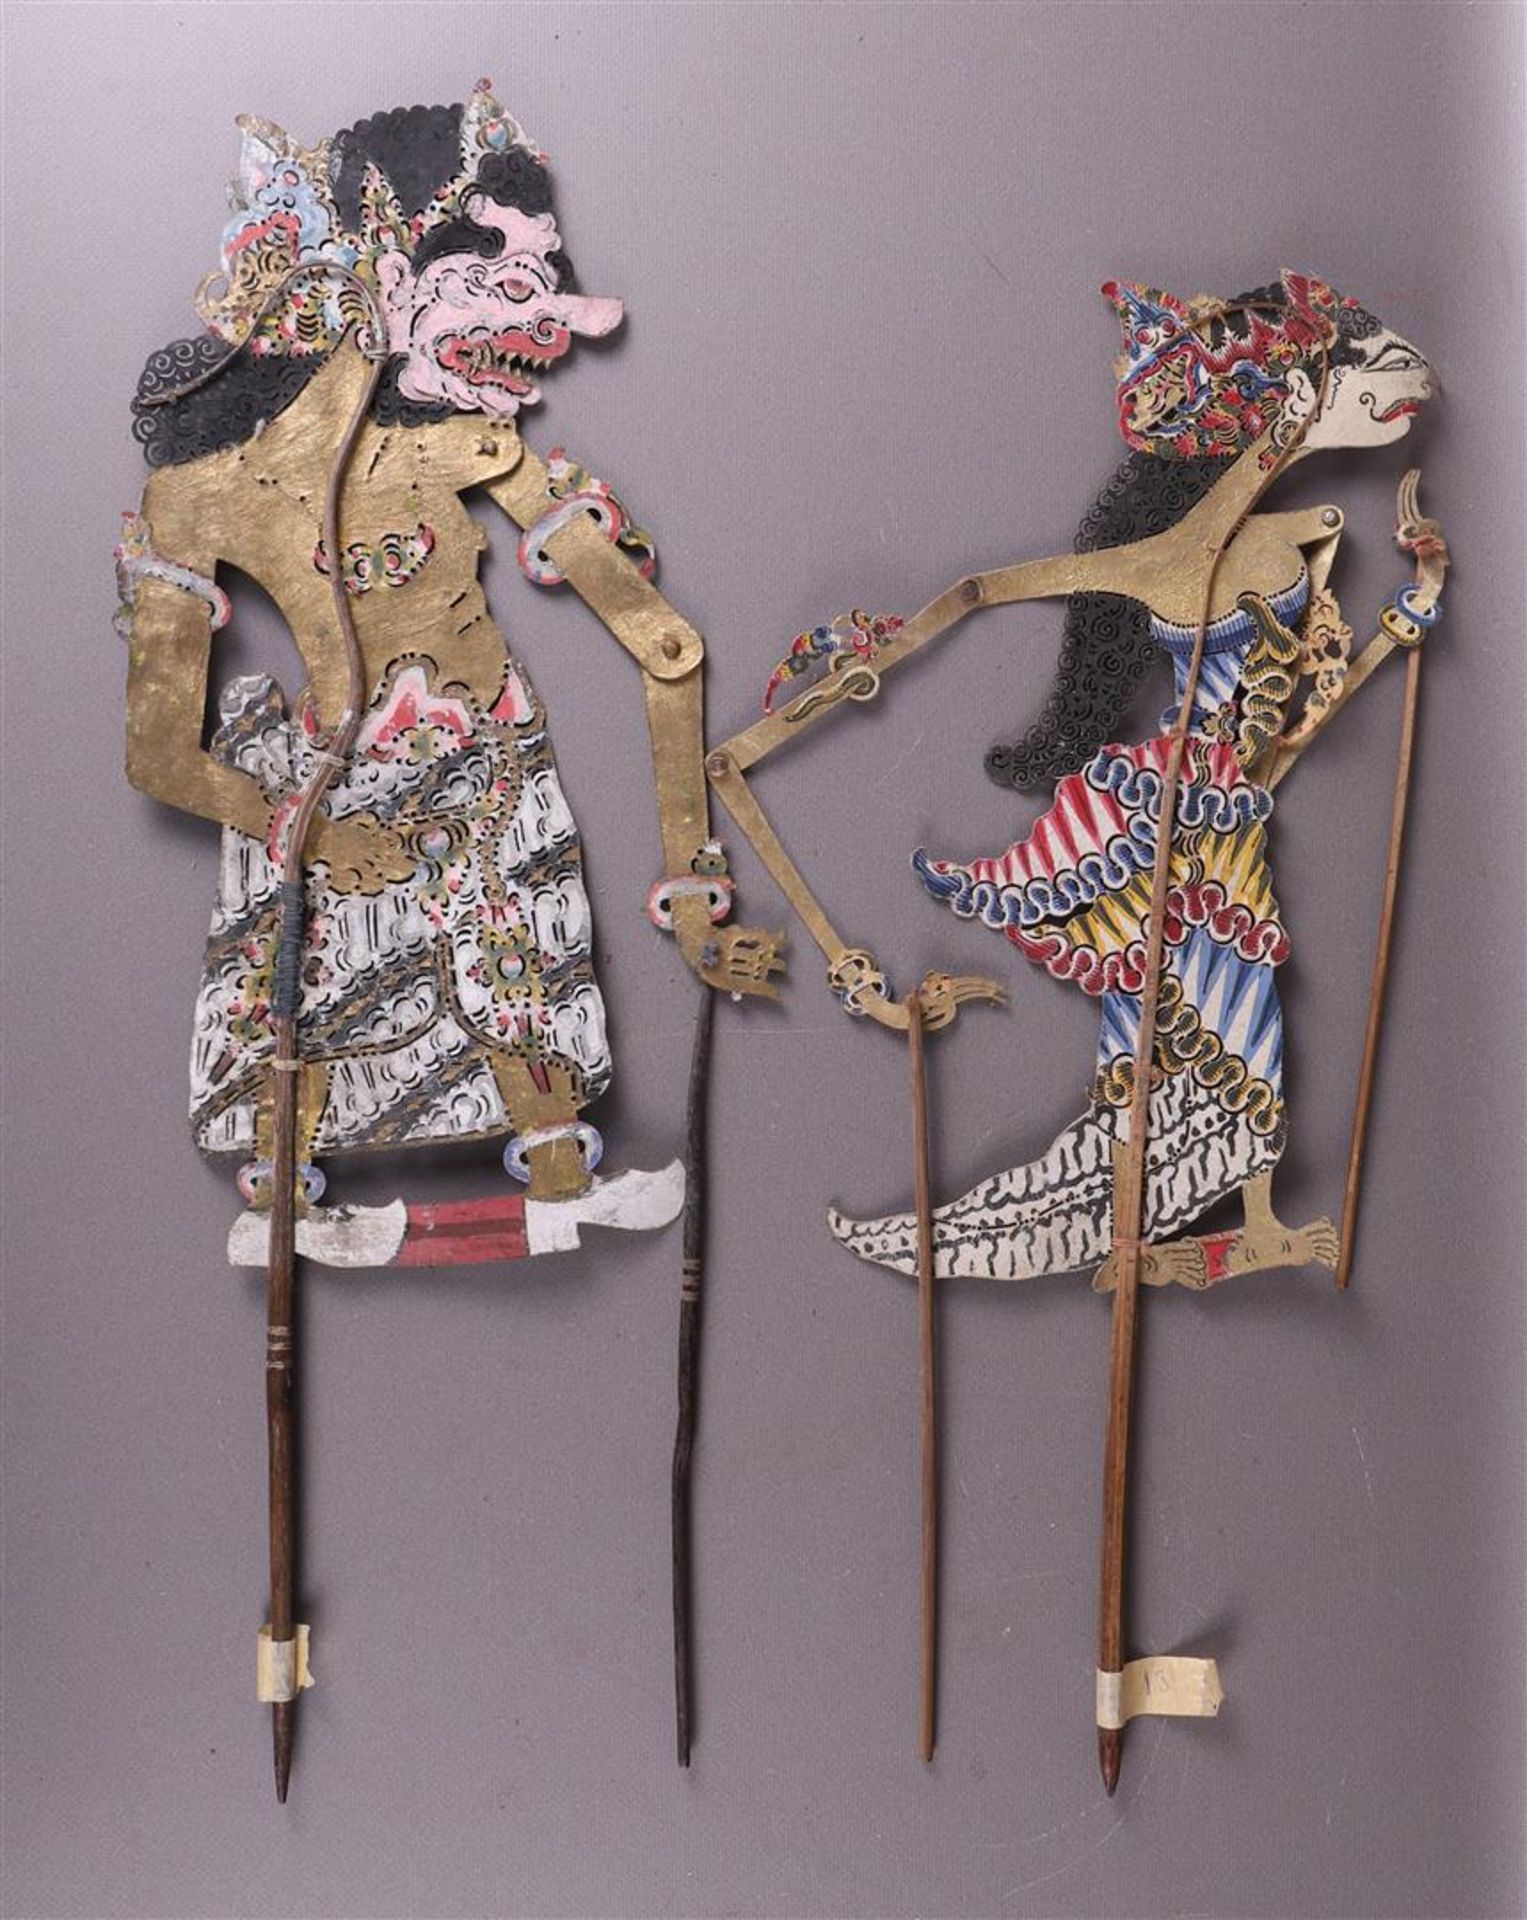 A collection of Wayang Kulit dolls, Indonesia around 1900.